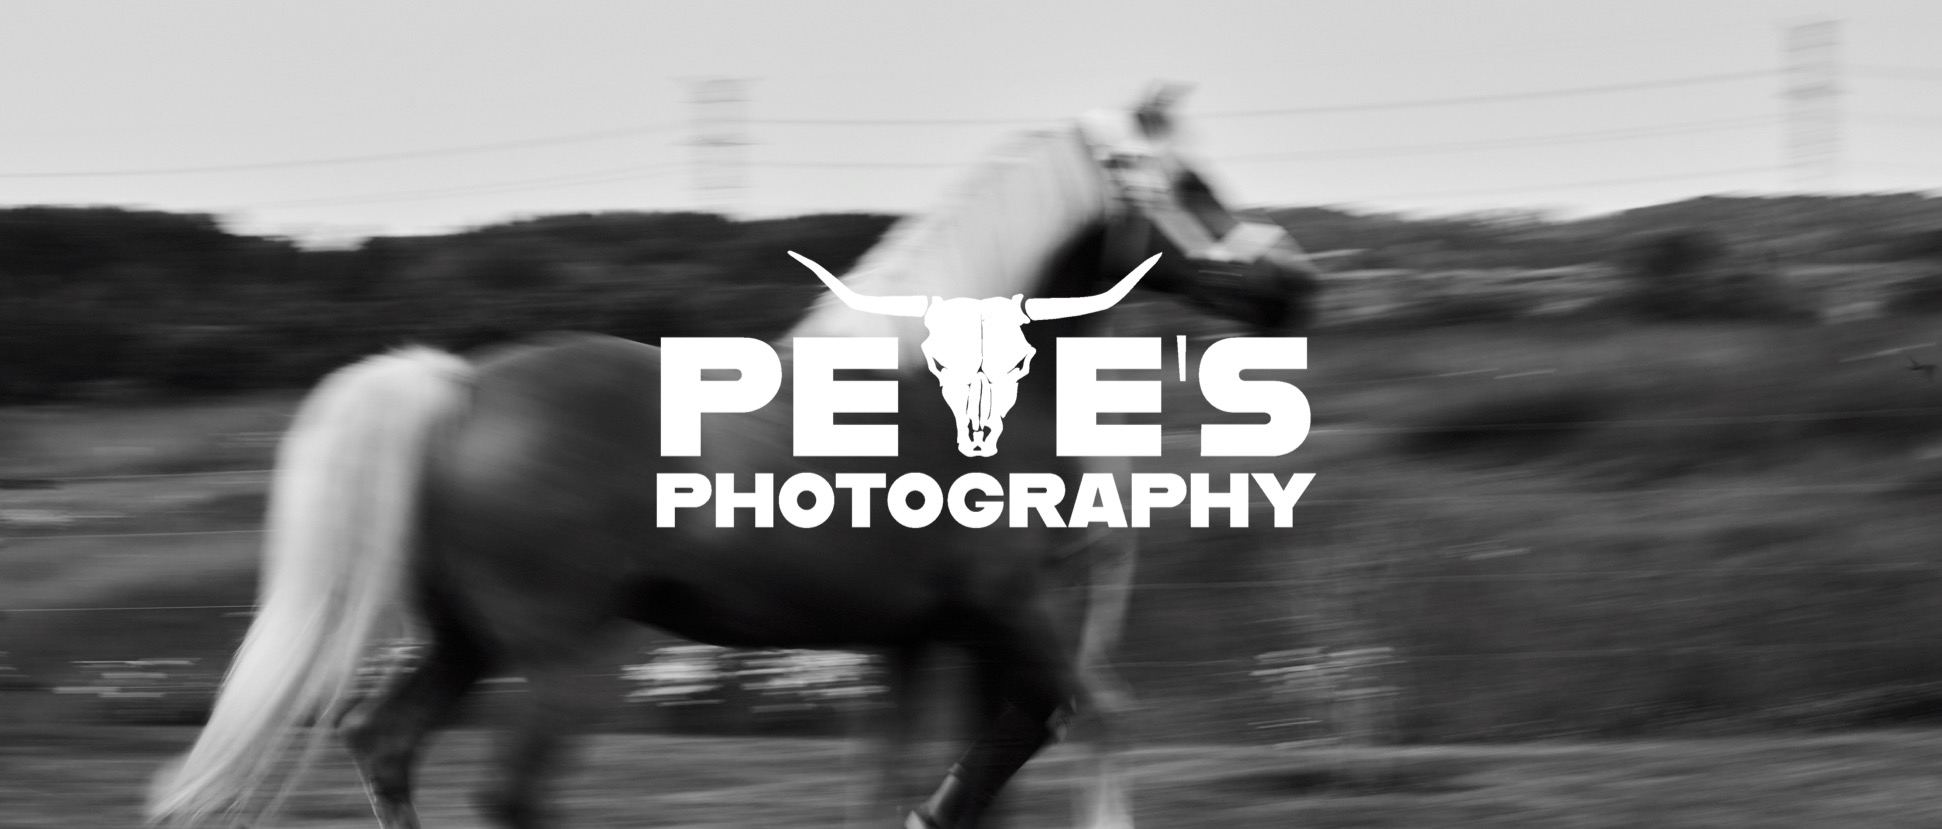 Pete's Photography - Equine Cattle Sorting Photographer - Ontario Canada